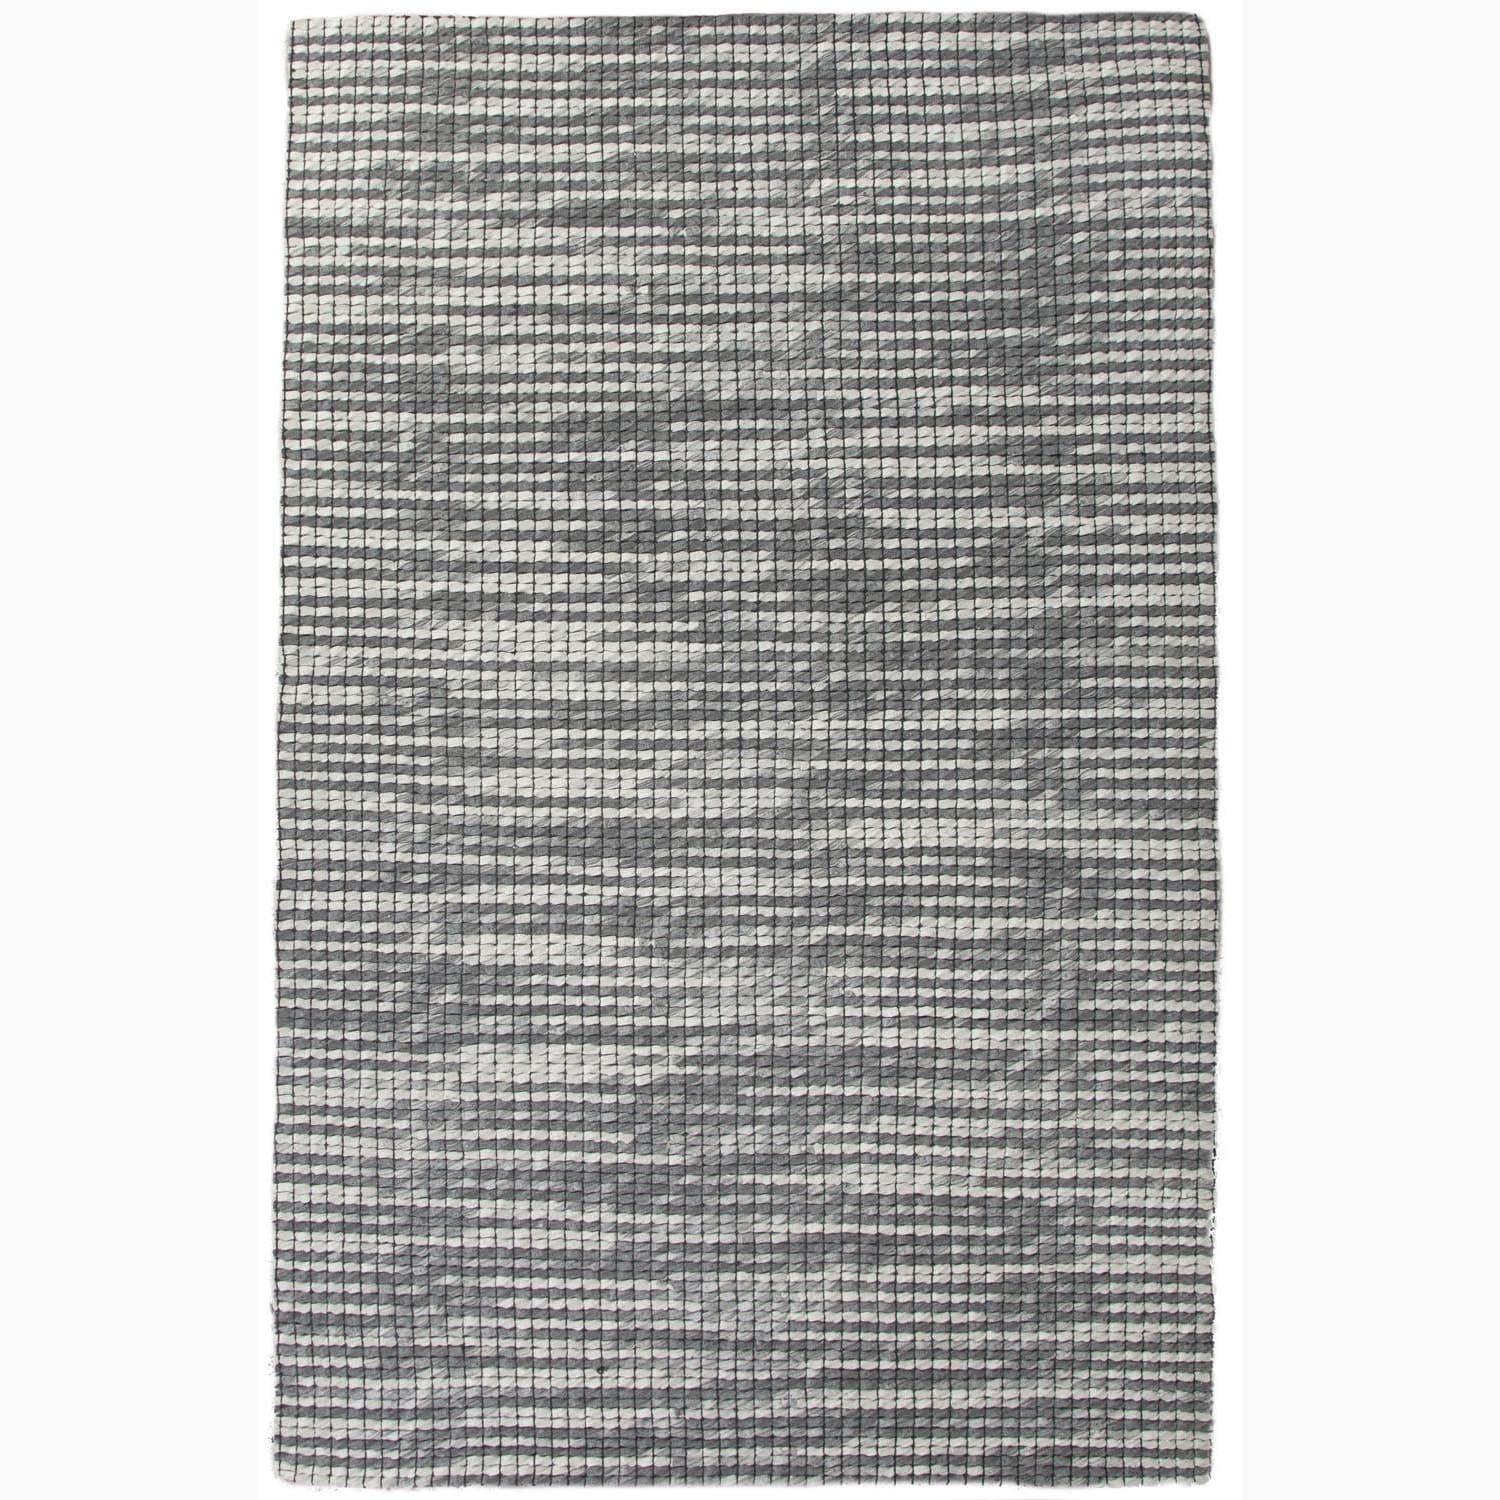 Hand made Gray/ Ivory Wool Textured Rug (2x3)